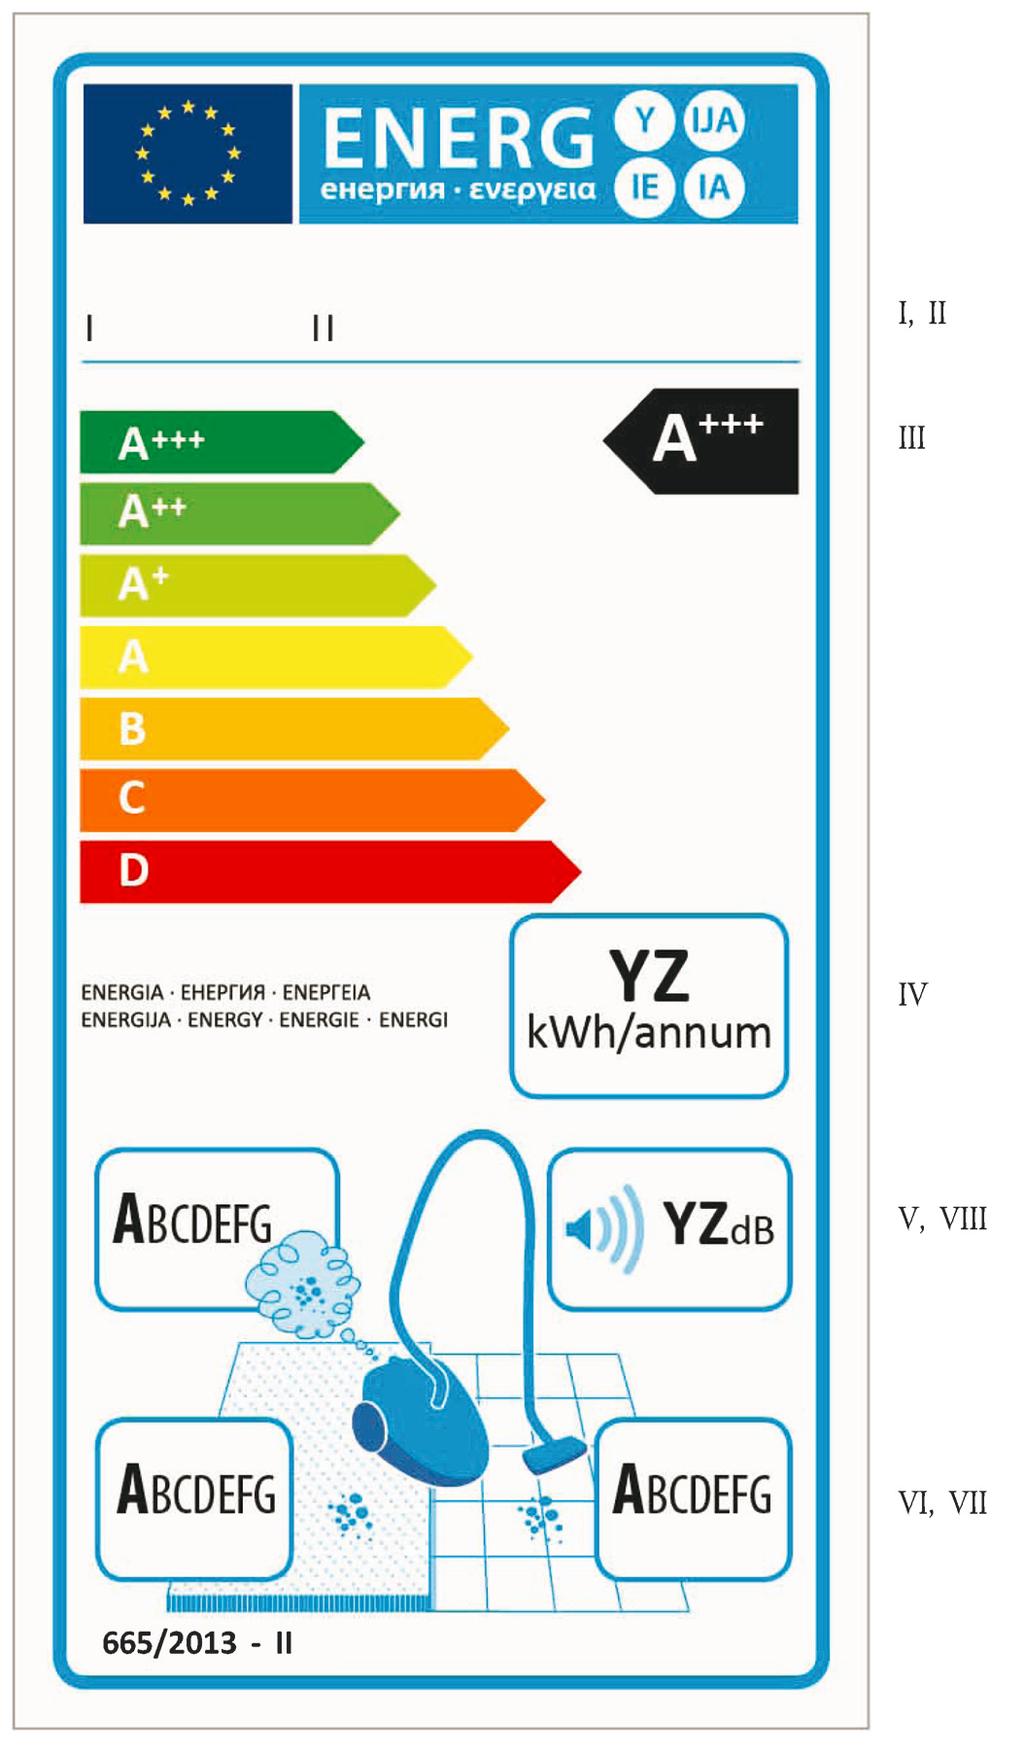 performance class Sound power level The energy label examples are showed as followed: General purpose vacuum cleaners Label 1 Eurofins Product Testing